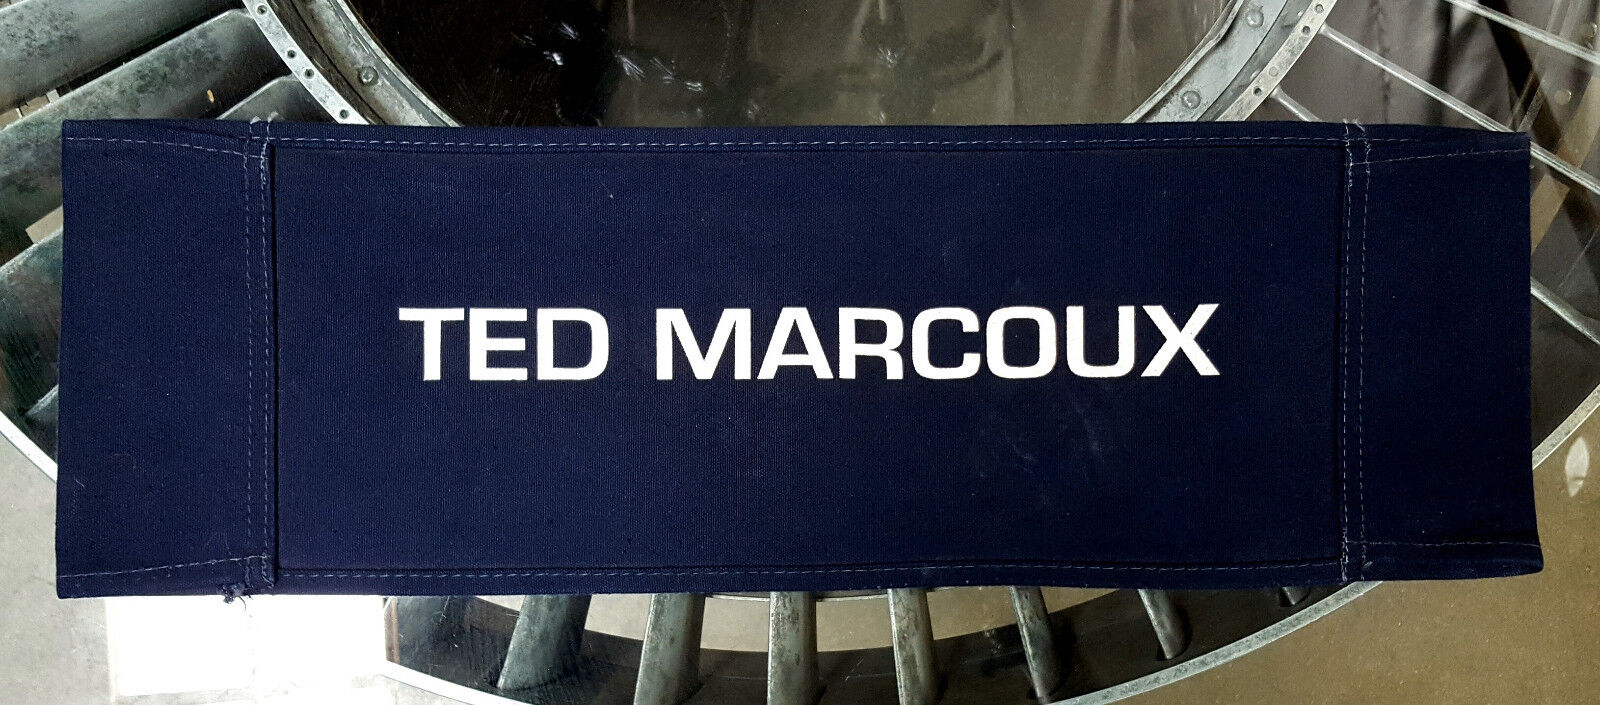 Ghost In The Machine ('93) Canvas Seat Back Made For Ted Marcoux - Actor